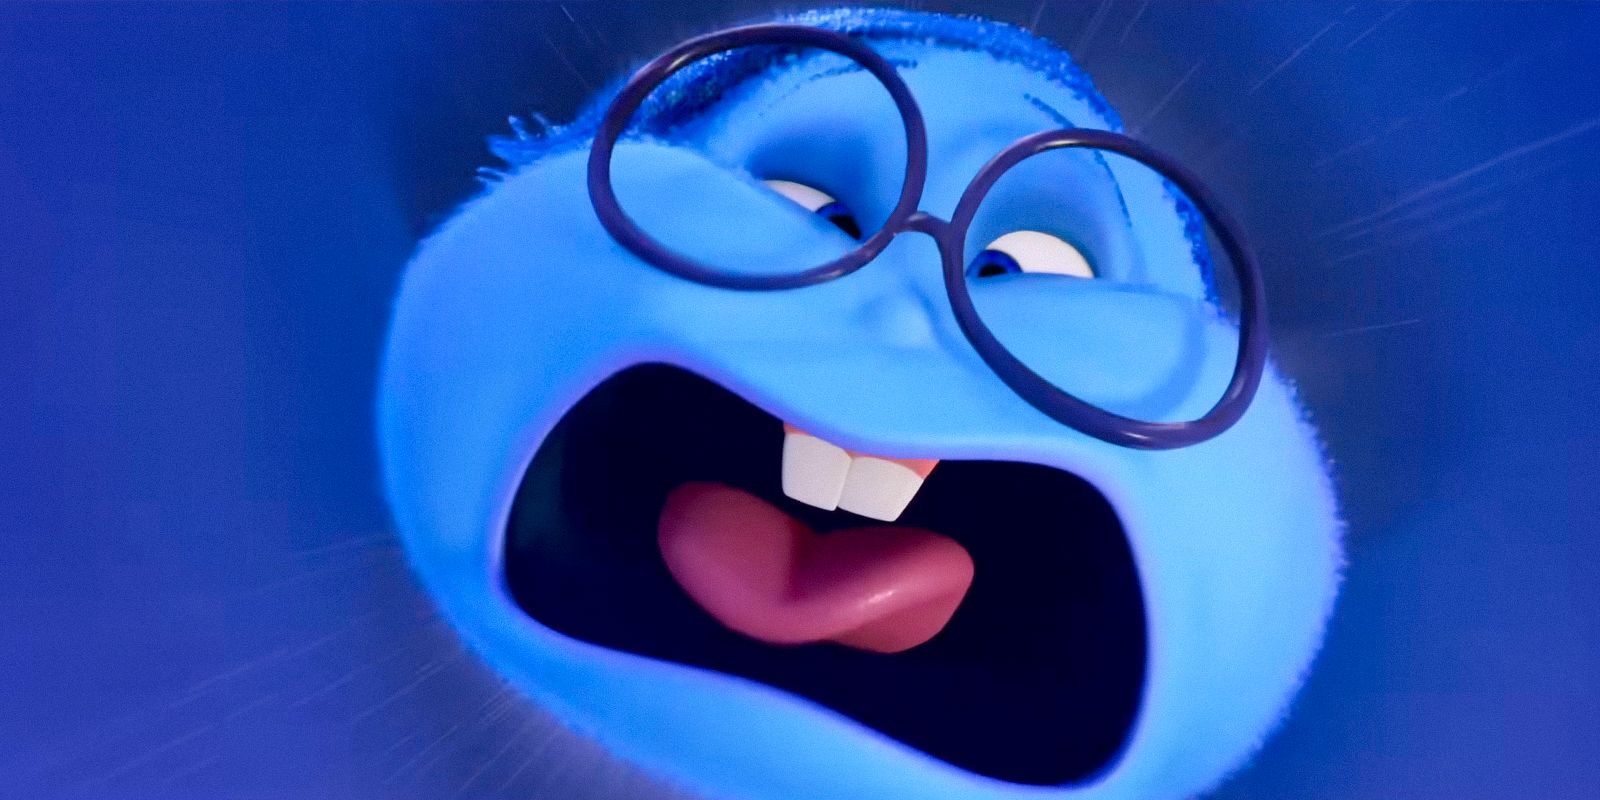 Sadness is traveling through the tube where memories are transported in Inside Out 2